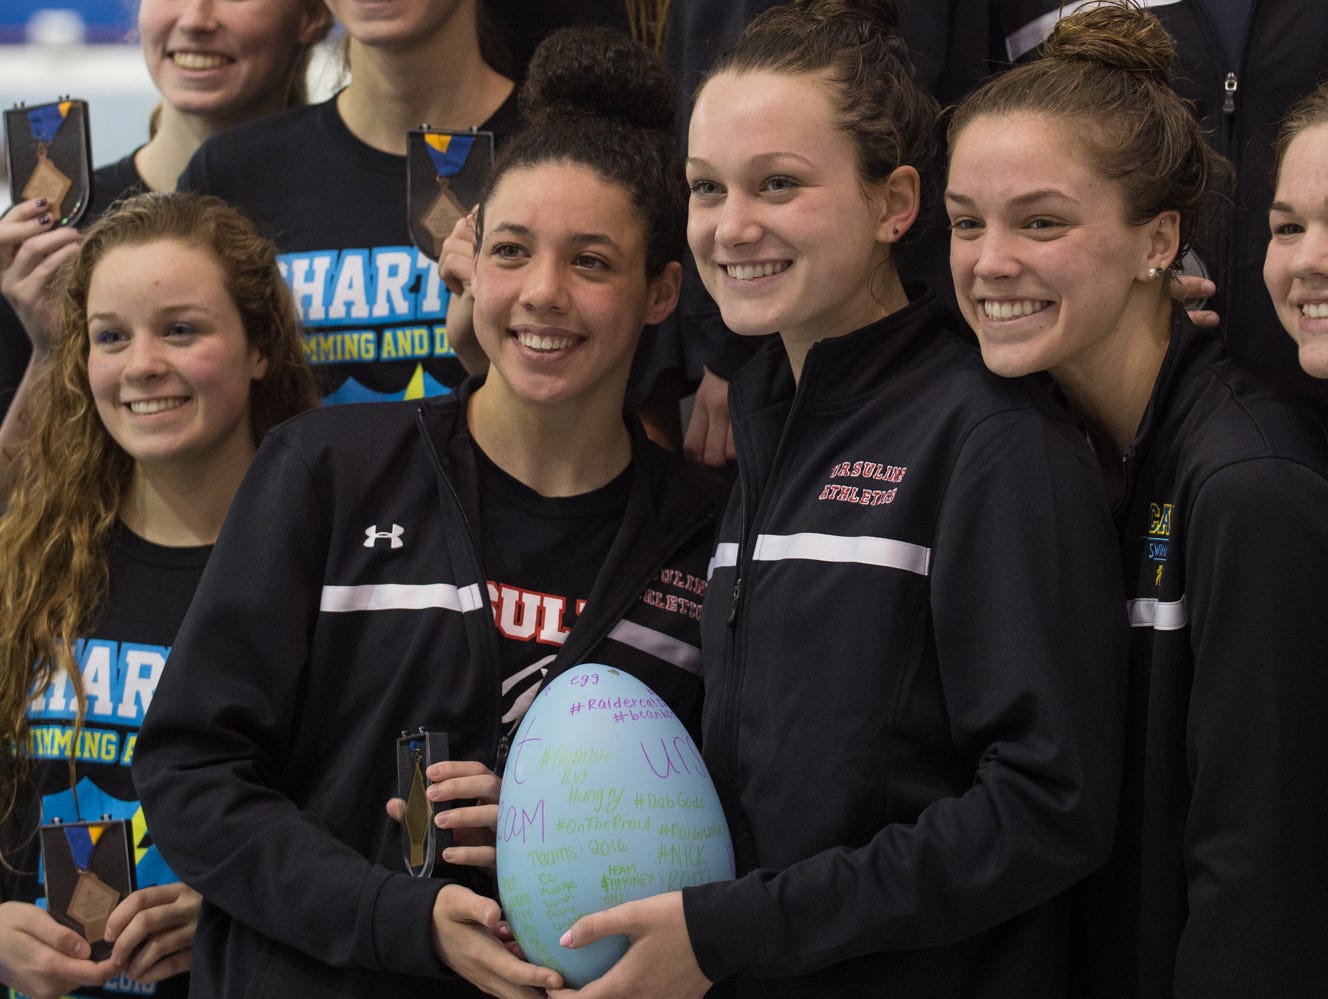 Swimmers from Ursuline Academy, center hold up their egg during the medal presentation for winning the 200 yard medley relay at the girl's DIAA swimming and diving championships at the University of Delaware.